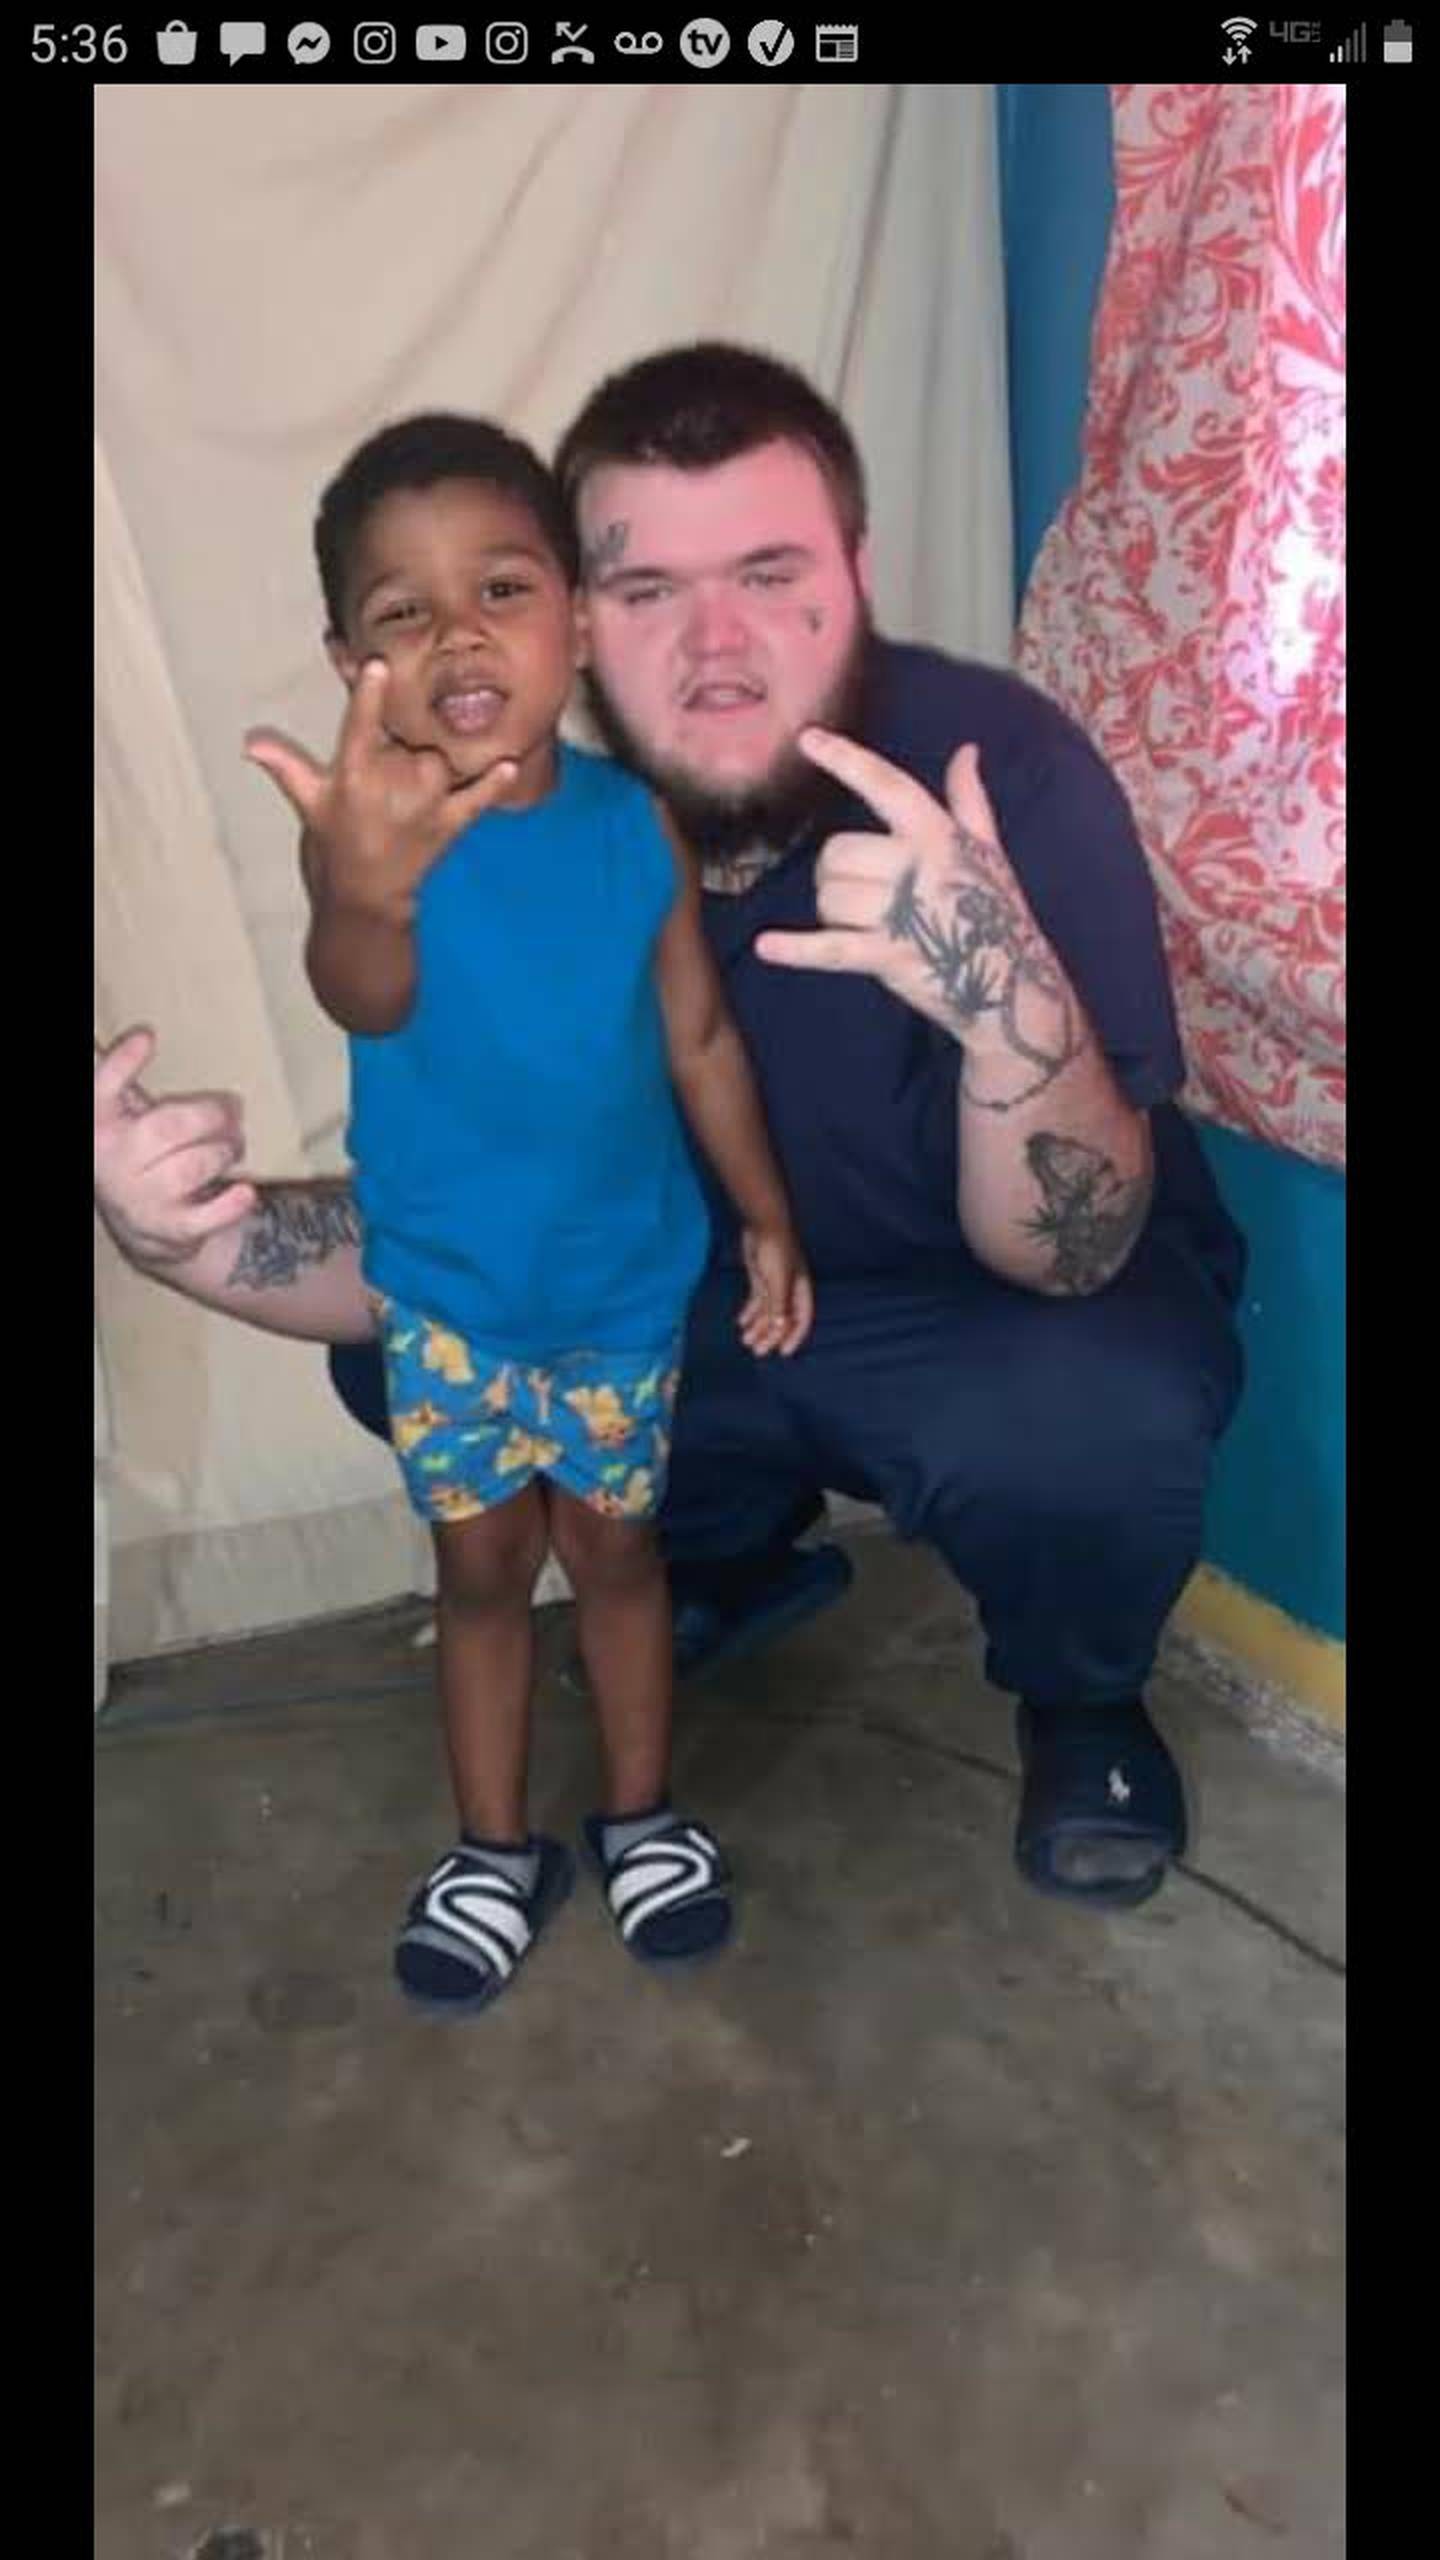 Family shared this photo of Danny Waye (left), a 6-year-old boy who was killed after shooting himself while handling a loaded gun he found.